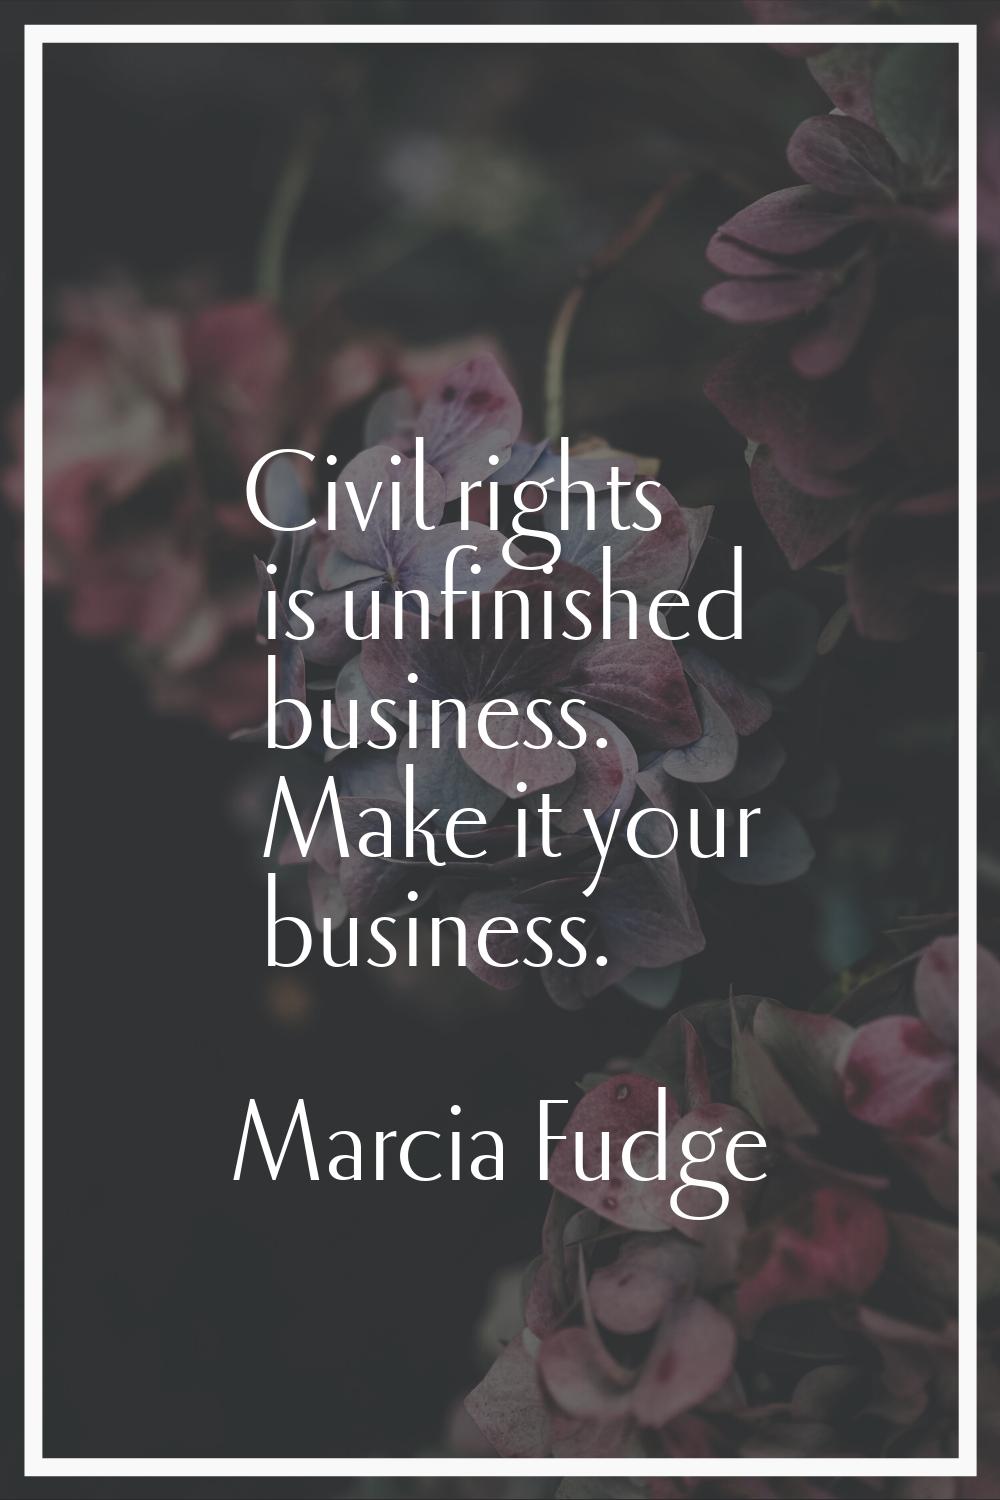 Civil rights is unfinished business. Make it your business.